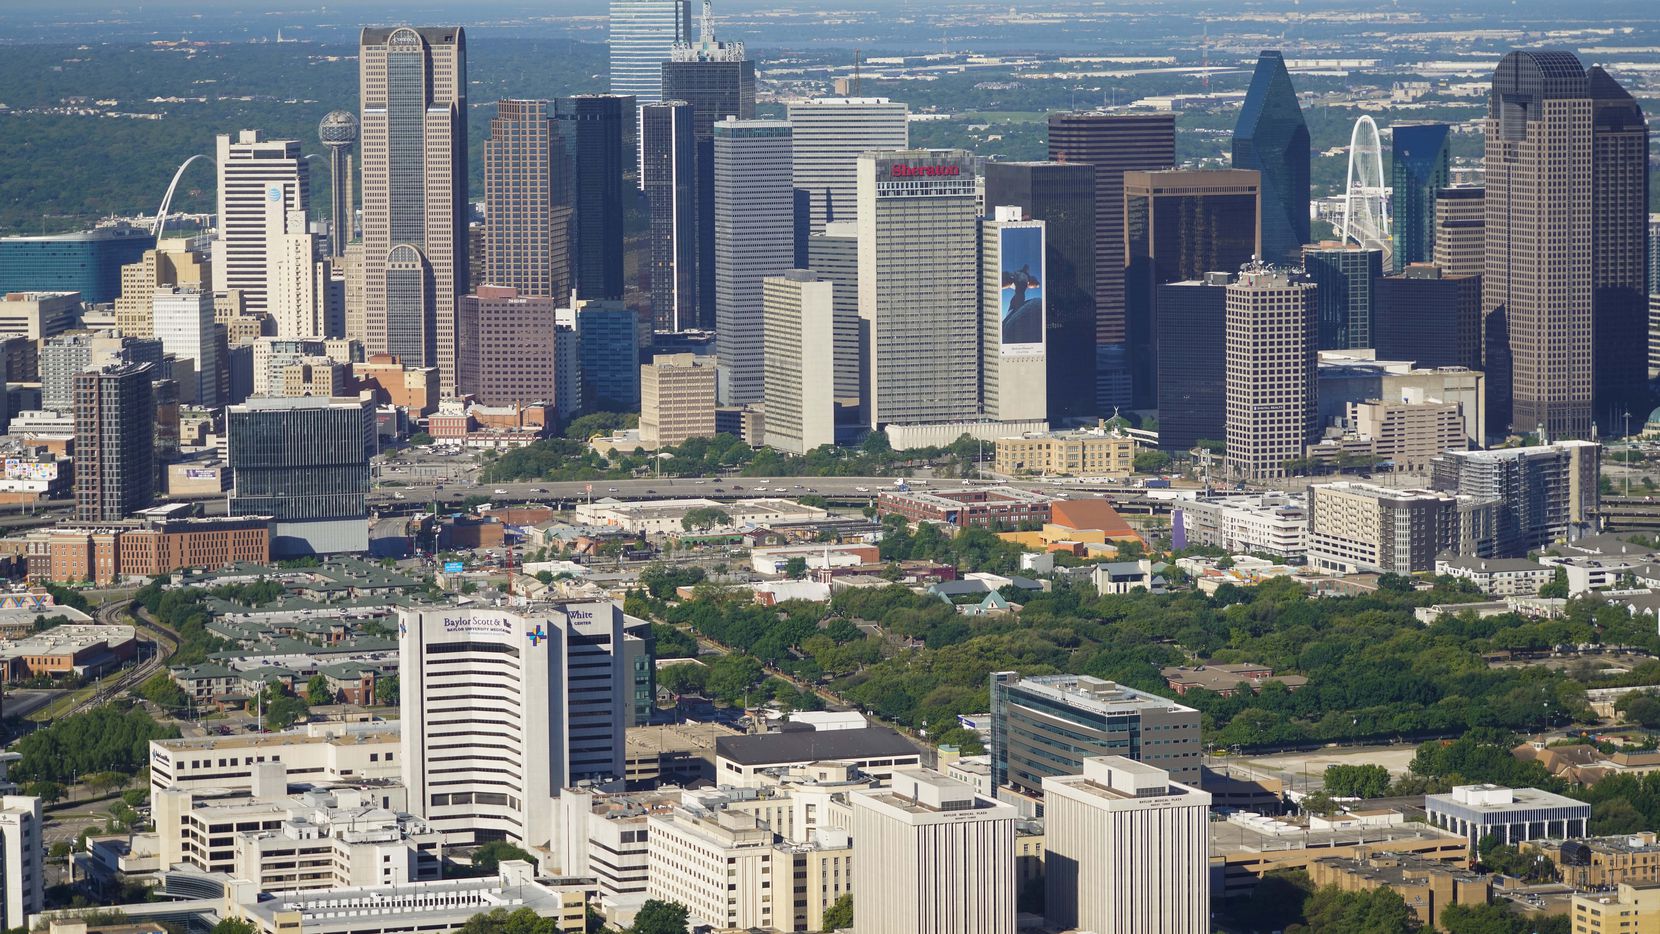 The Dallas Regional Chamber represents the region's broad-based business community.